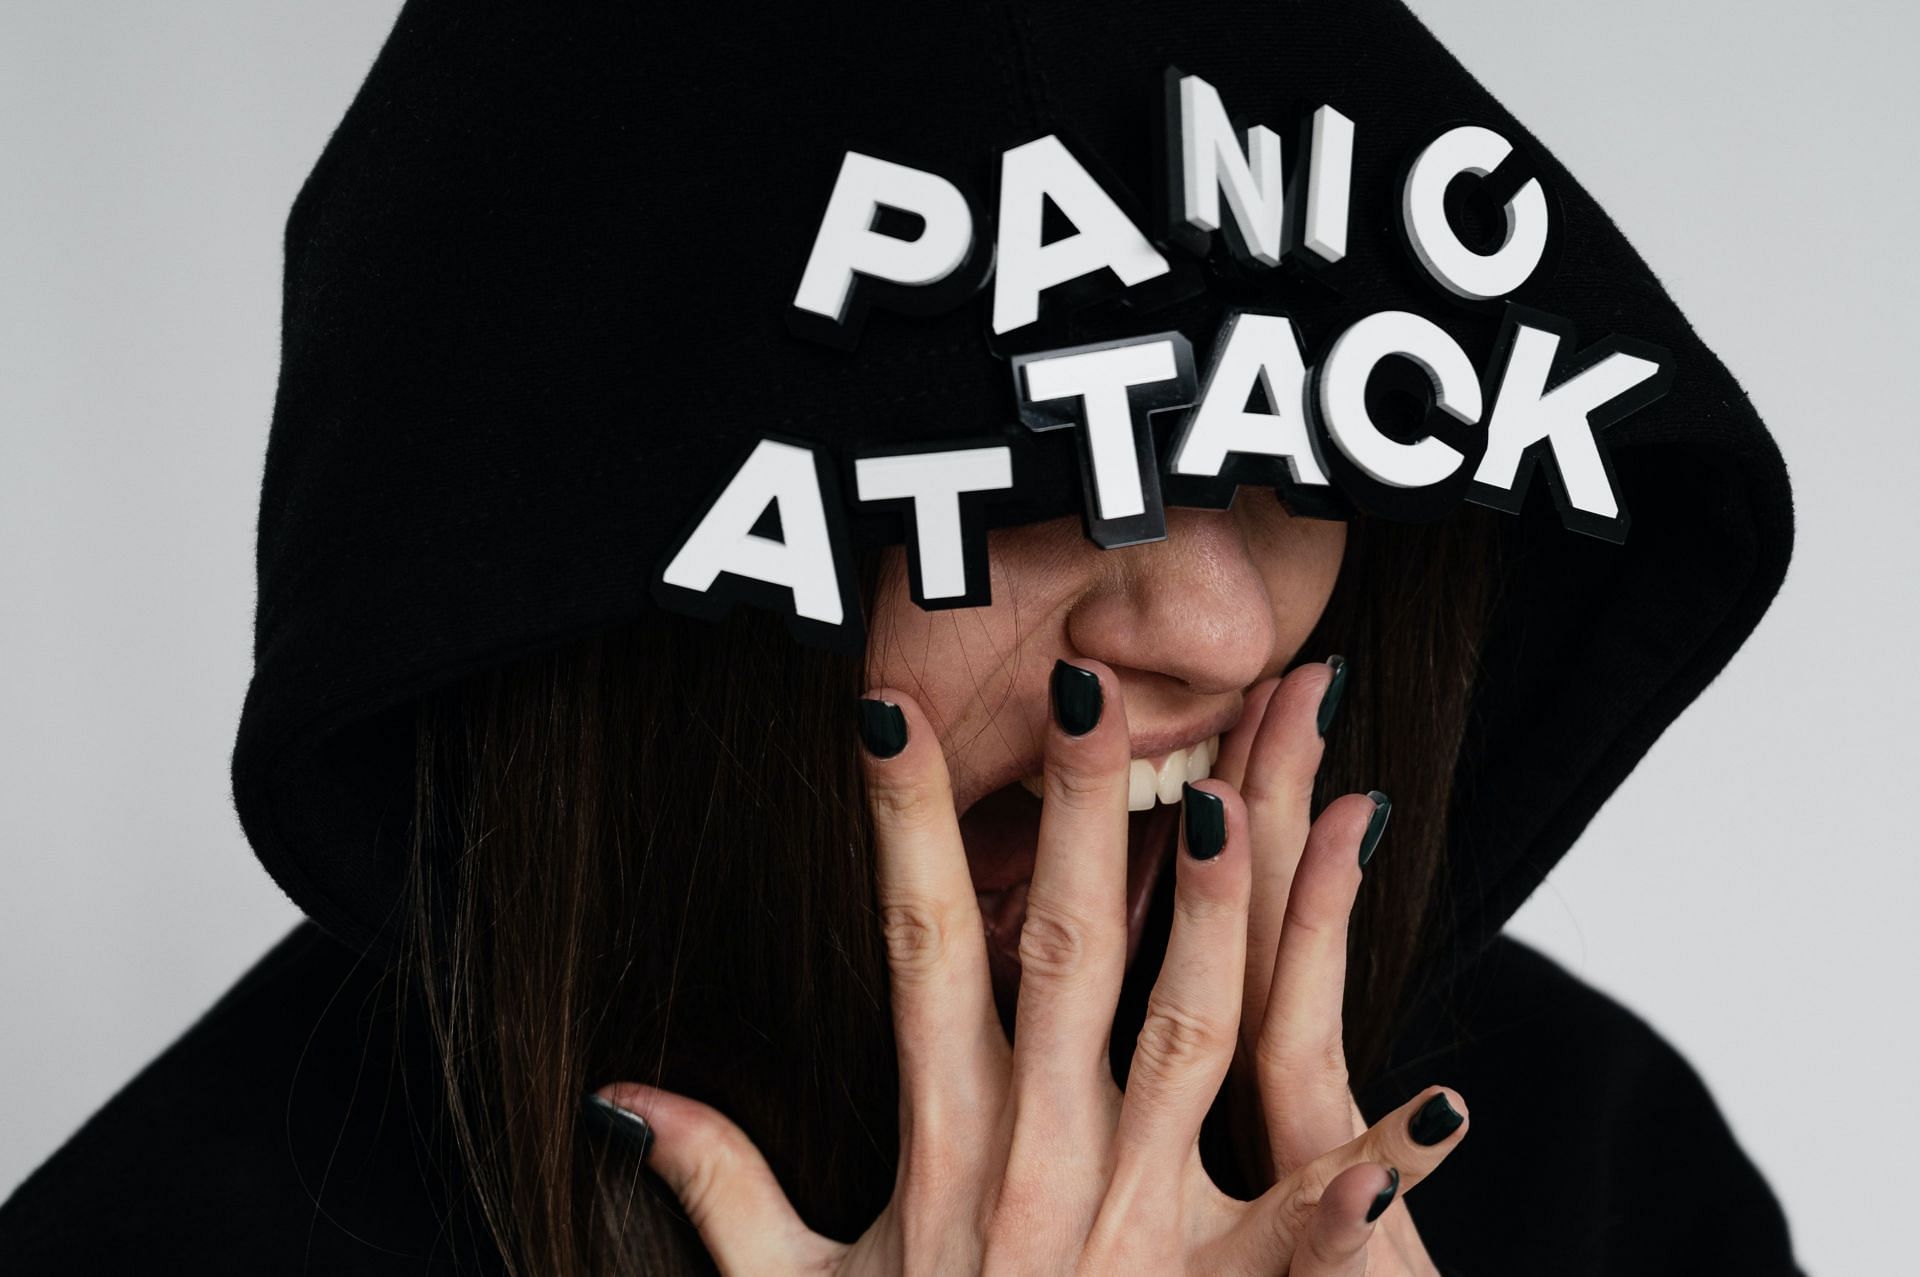 Panic attack can feel like your world is collapsing but there are ways to recover. (Image via Pexels/ Shvets Production)